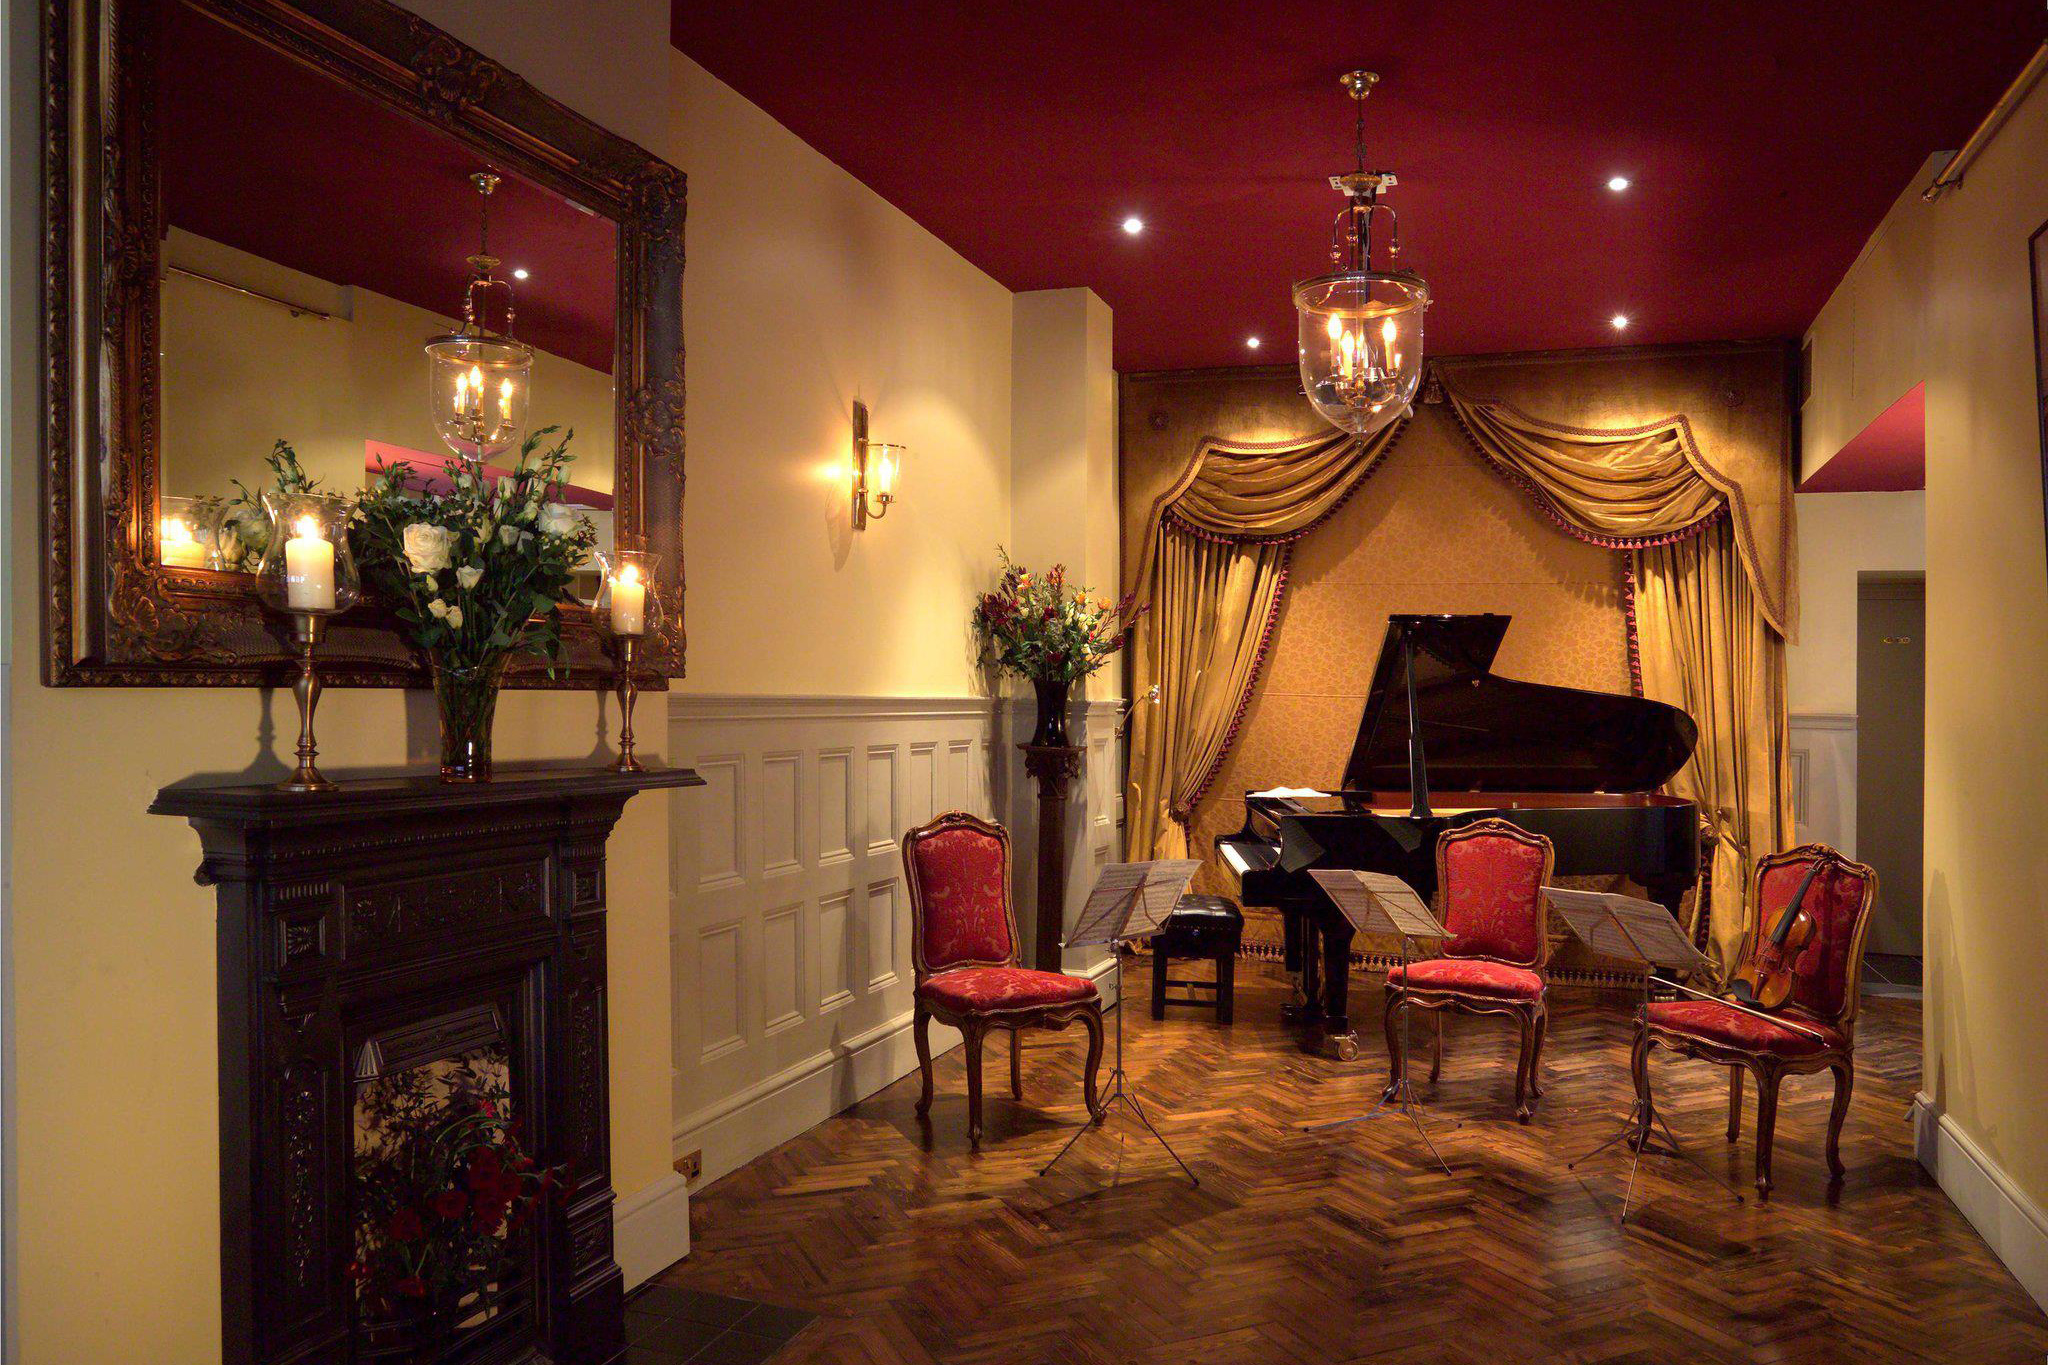 The interior of an ornate room with parquet flooring, red chairs, a mirror on the wall and a grand piano at the back of the room